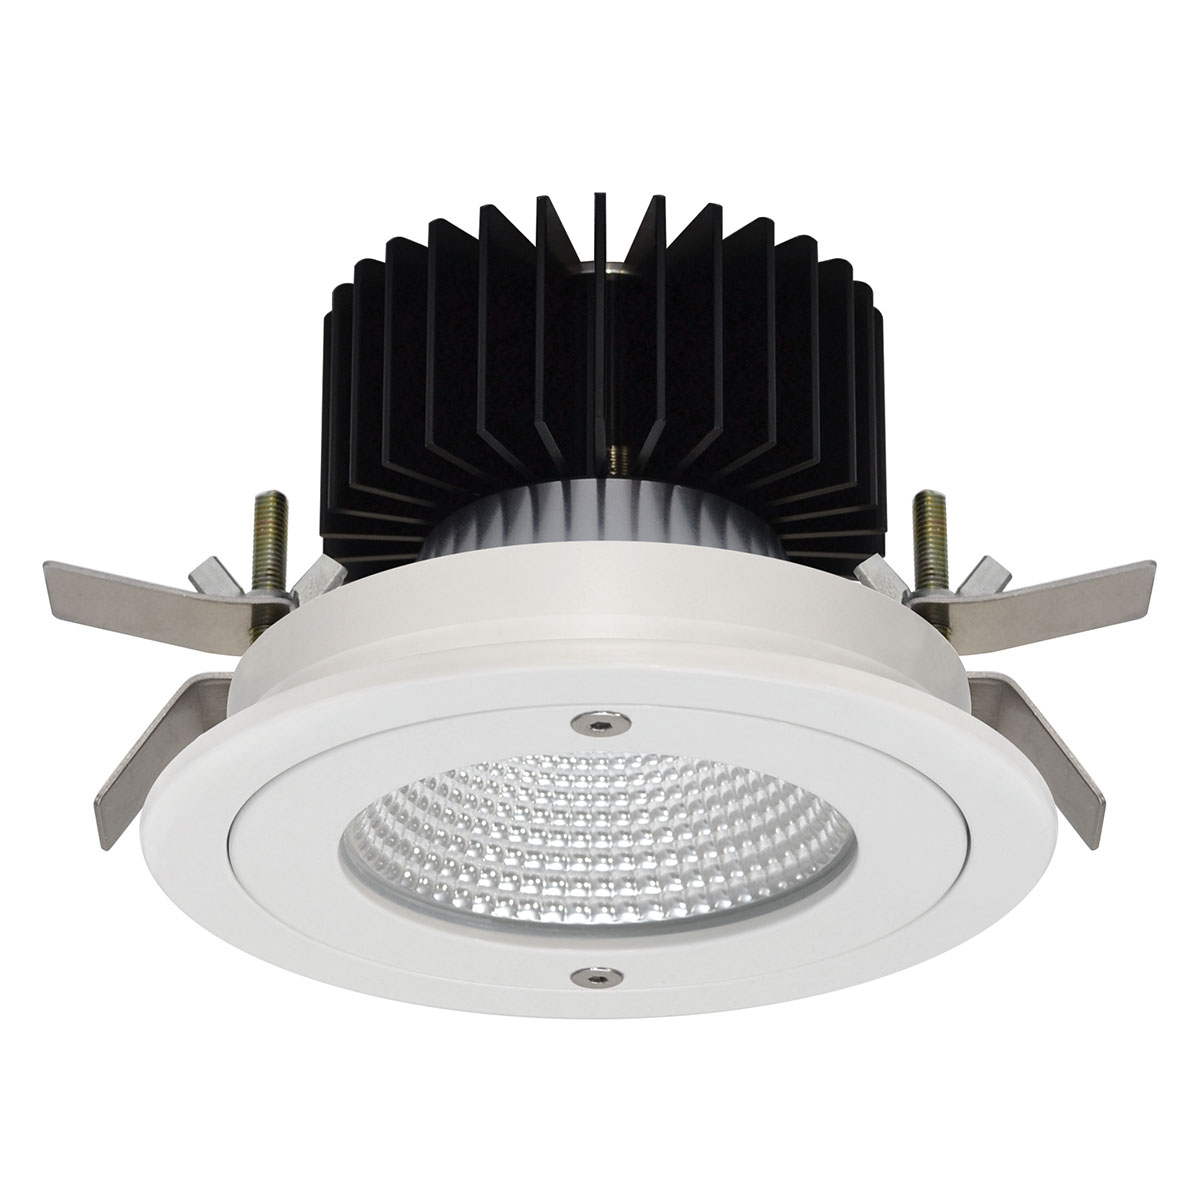 Kopa 7W Anti Tamper Fixed Round Recessed Downlight IP65 Rated 25° Degree Reflector White